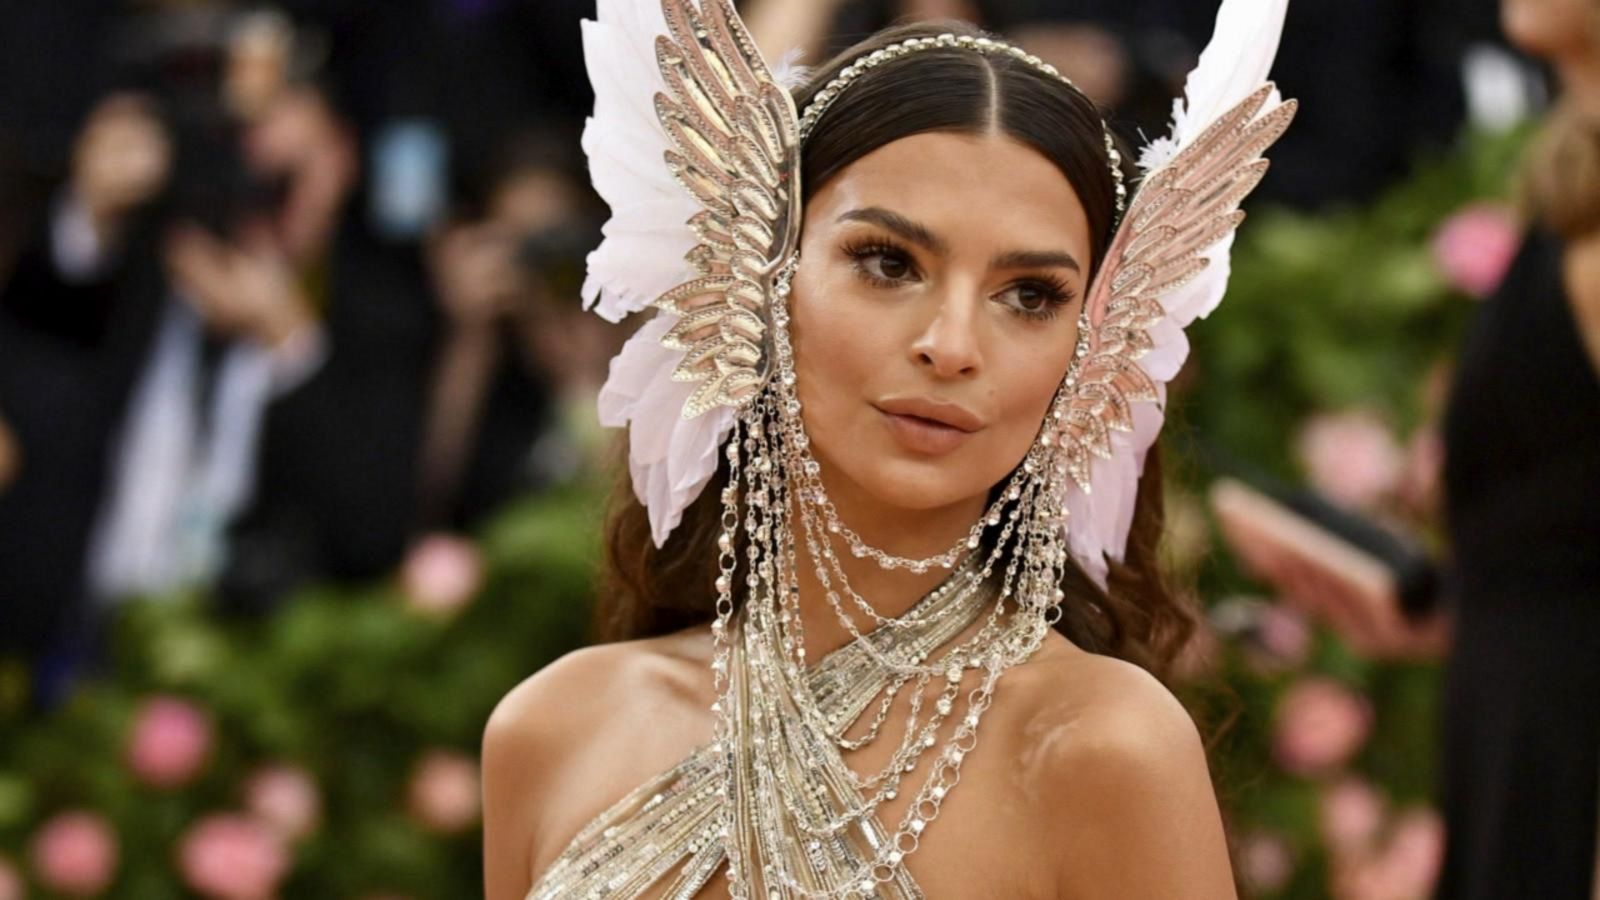 VIDEO: Getting ready for the pink carpet at the Met Gala